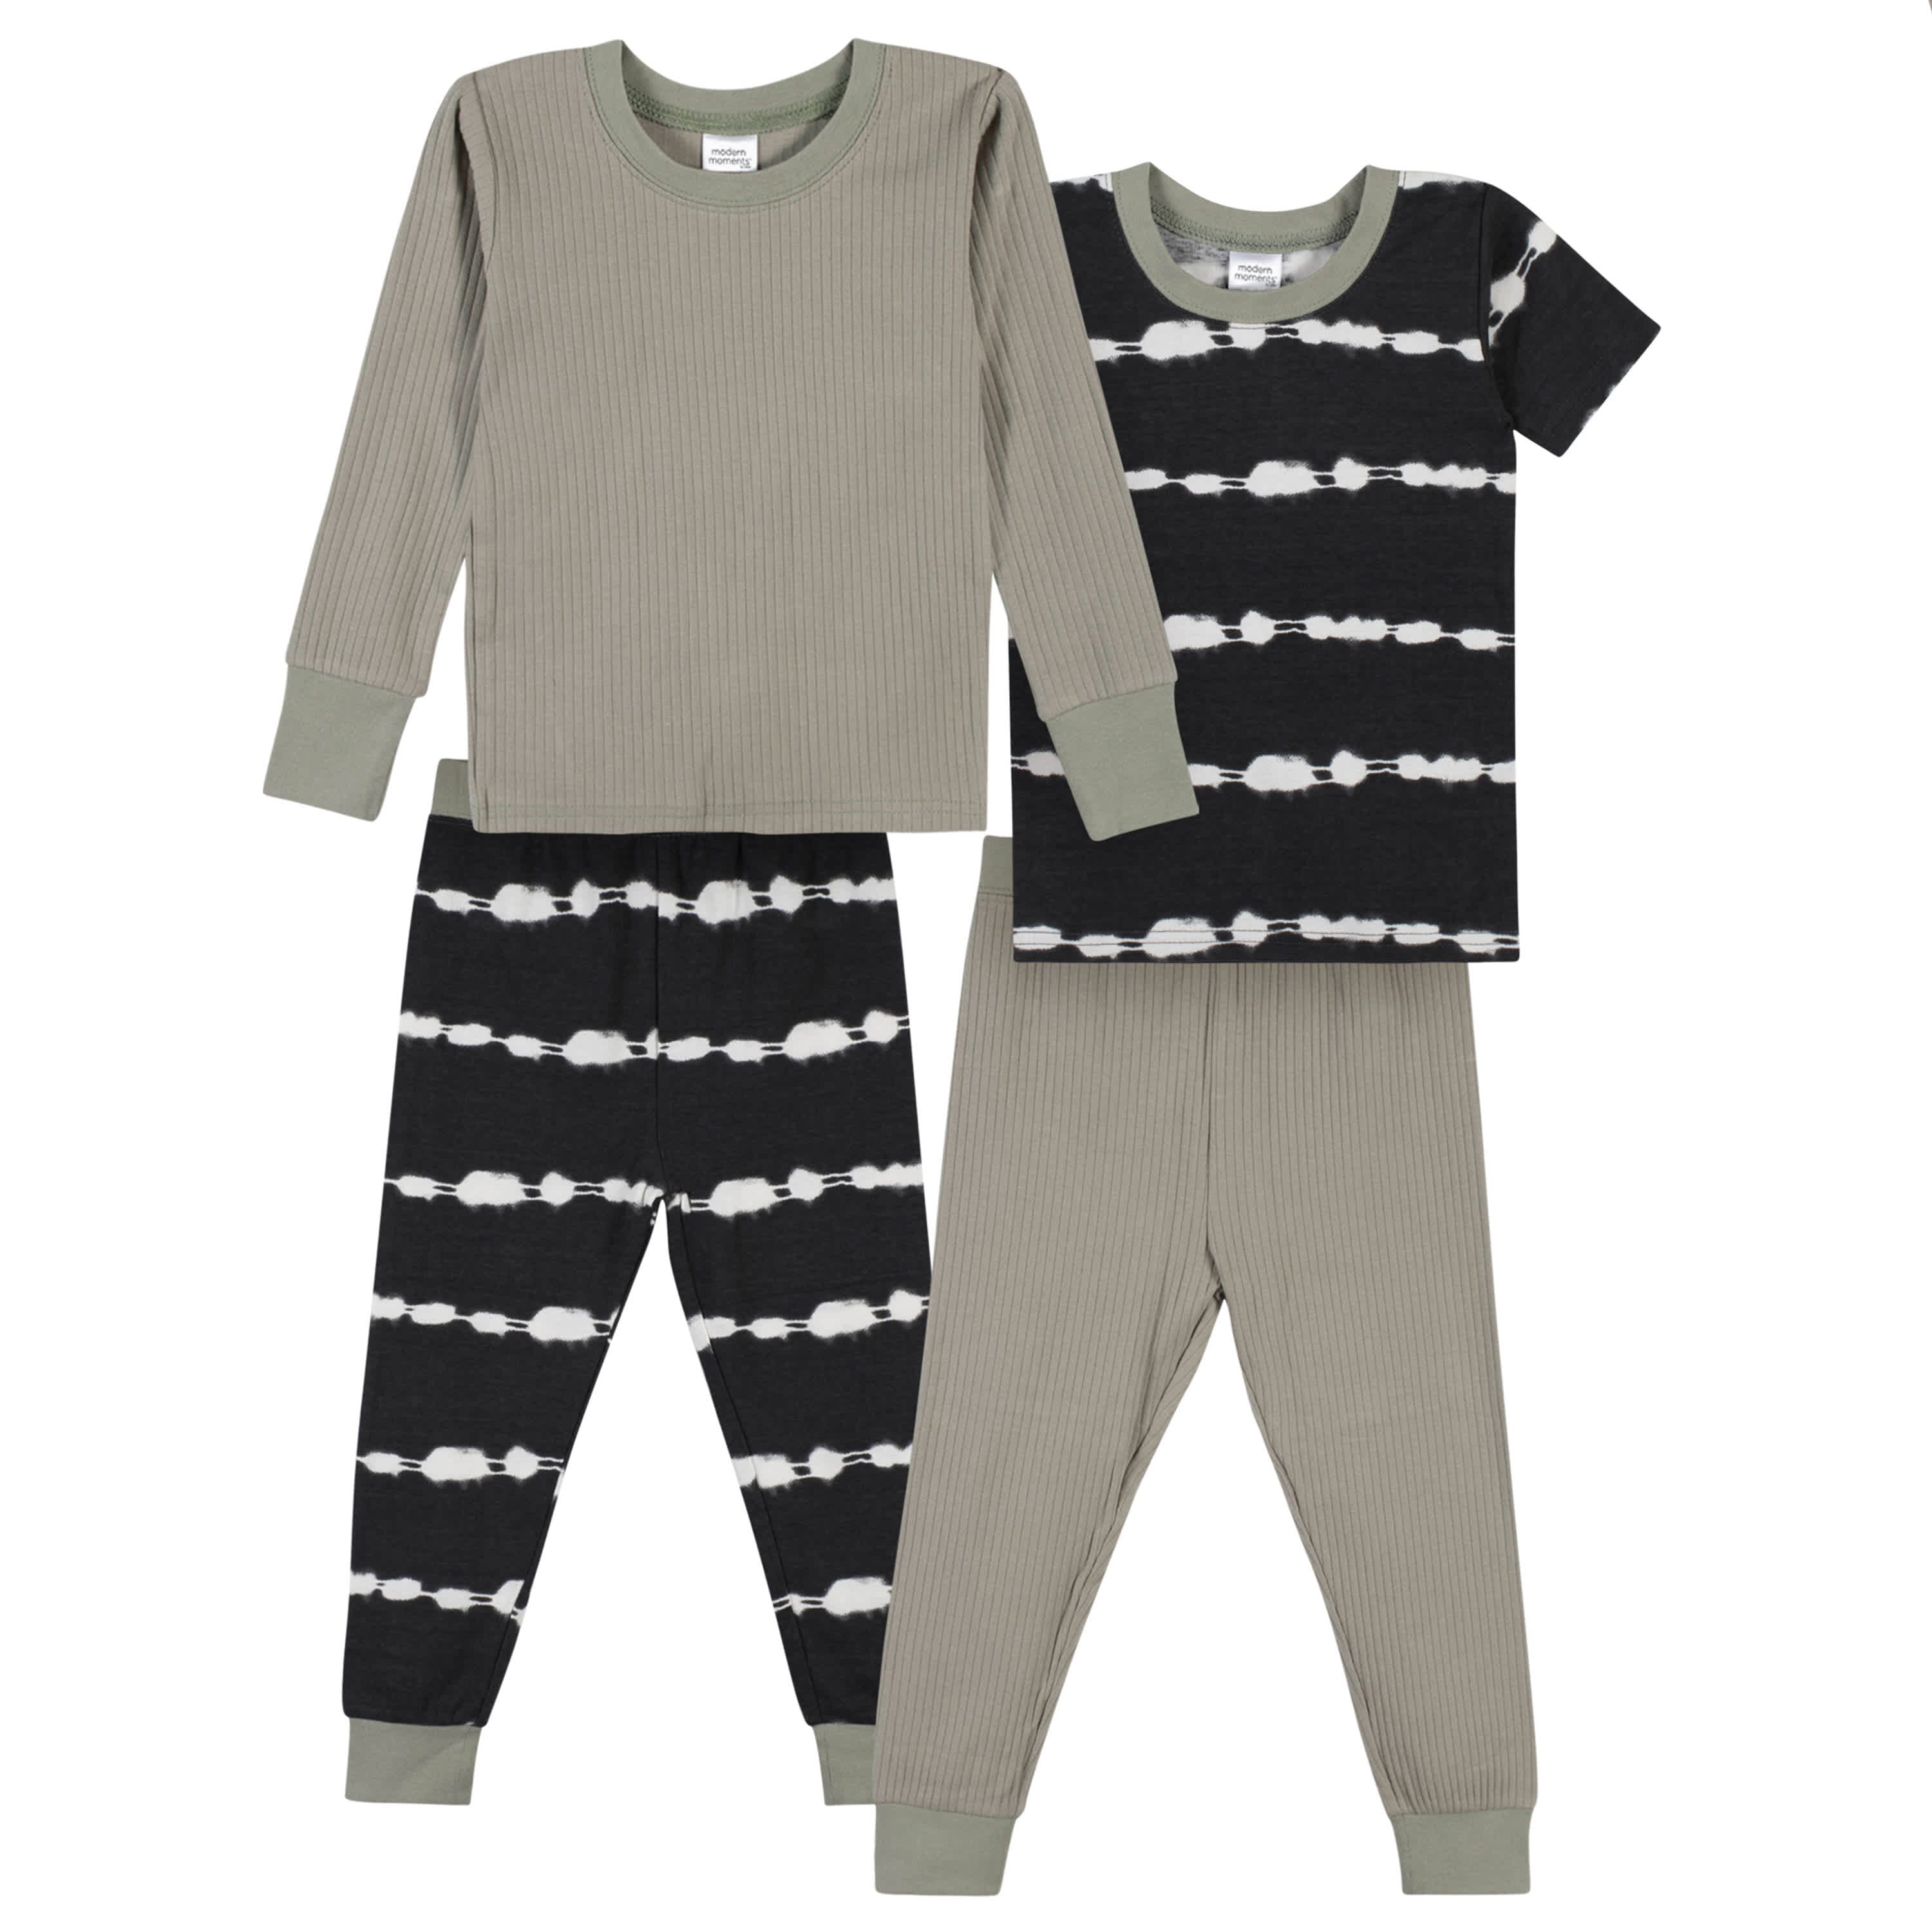 Modern Moments by Gerber Toddler Boy Tight Fitting Pajamas Set, 2-Piece,  Sizes 12M-5T 